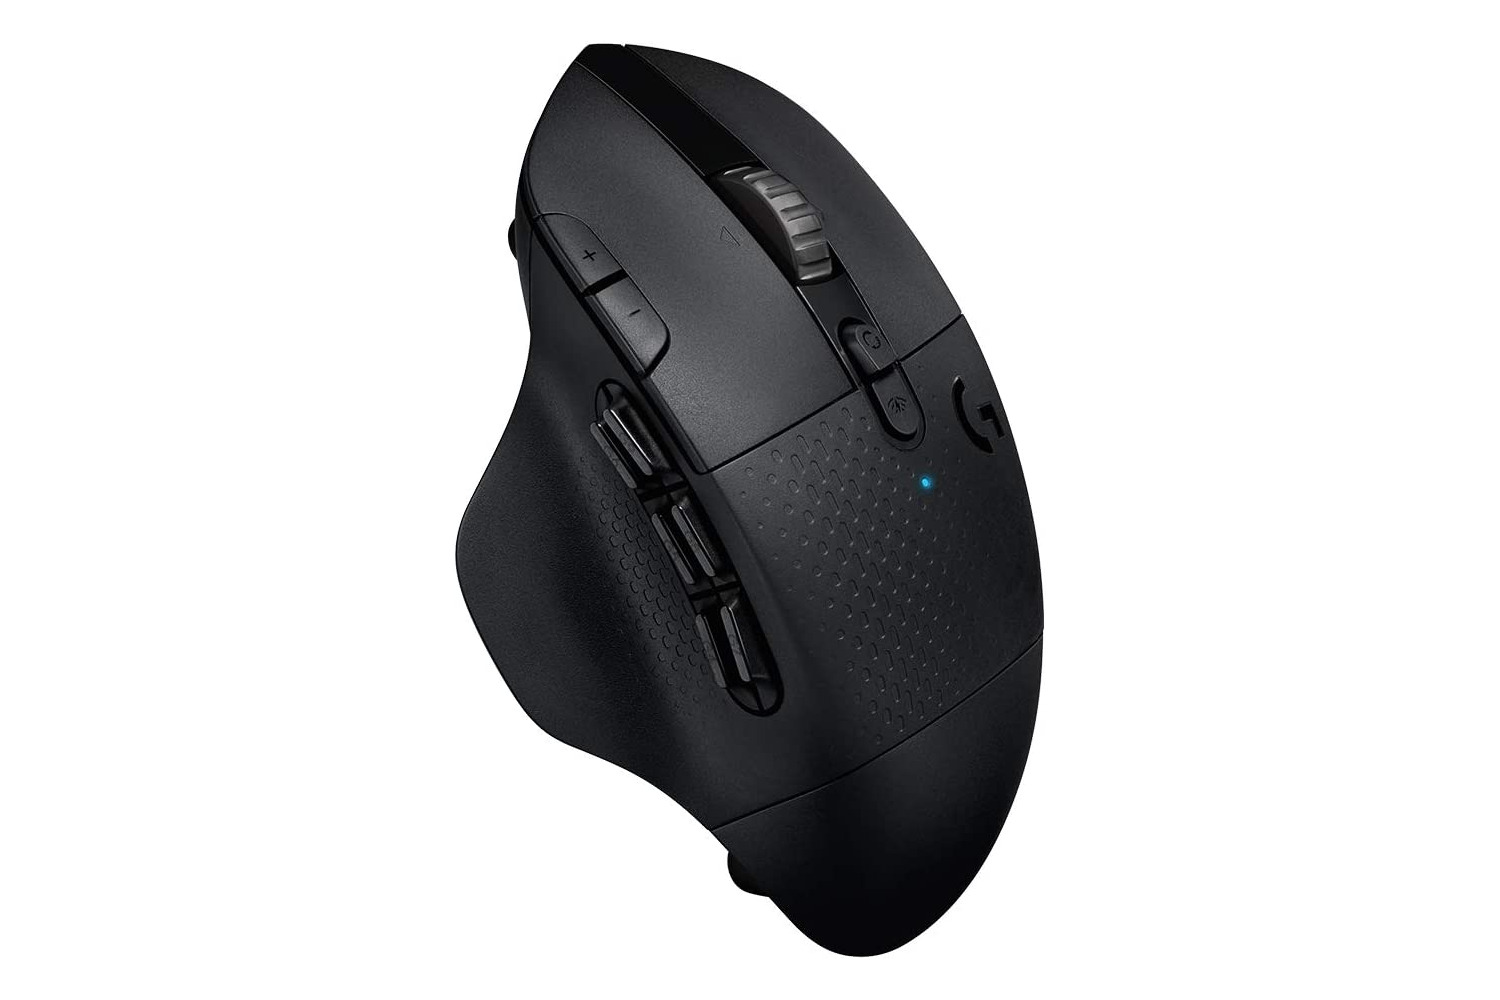 7 Best MMO Gaming Mouse: Wired and Wireless - Tech